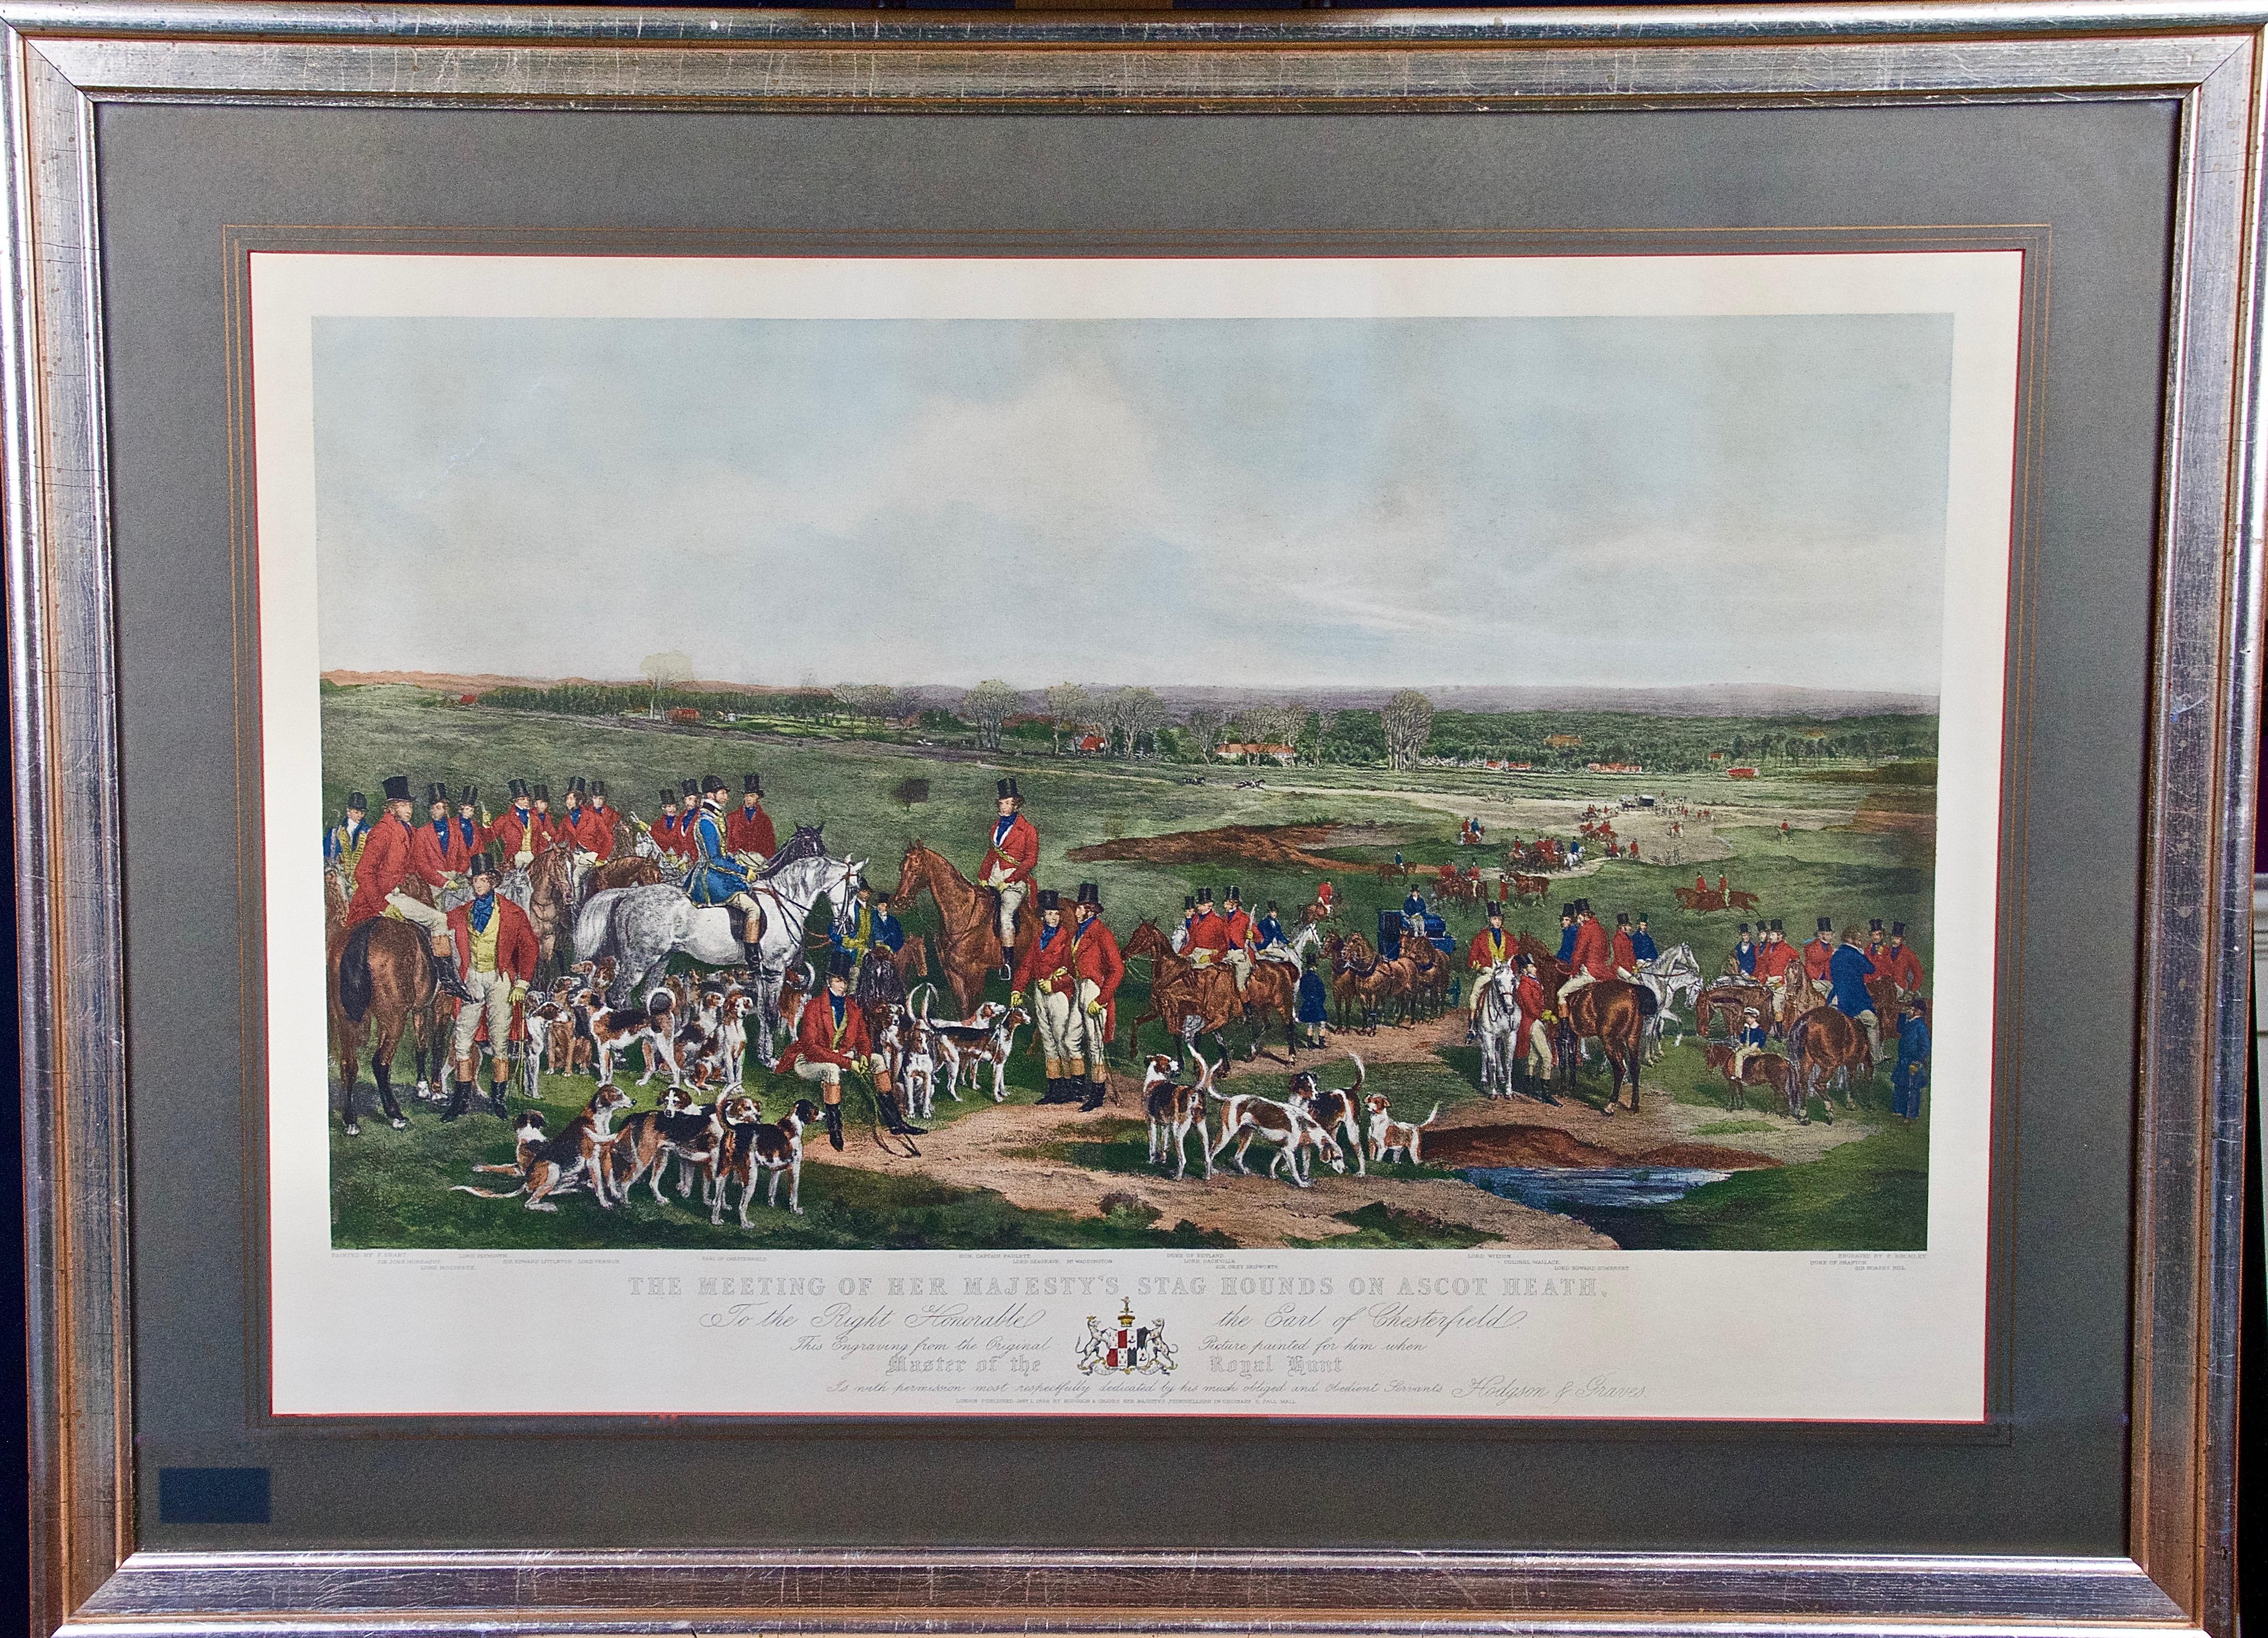 Her Majesty's Stag Hounds on Ascot, A Colored 19th Century British Hunting Scene